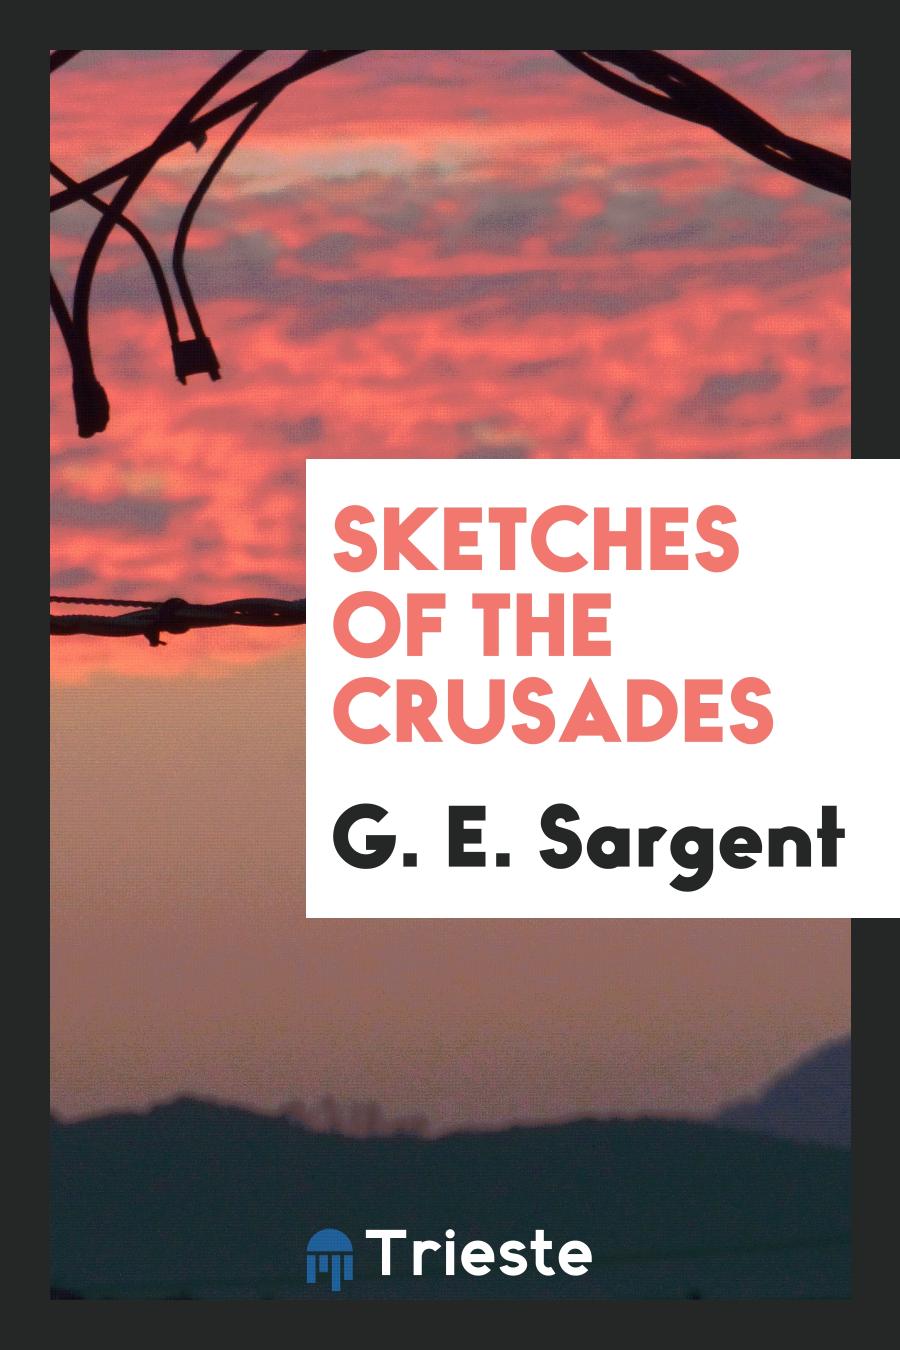 Sketches of the Crusades